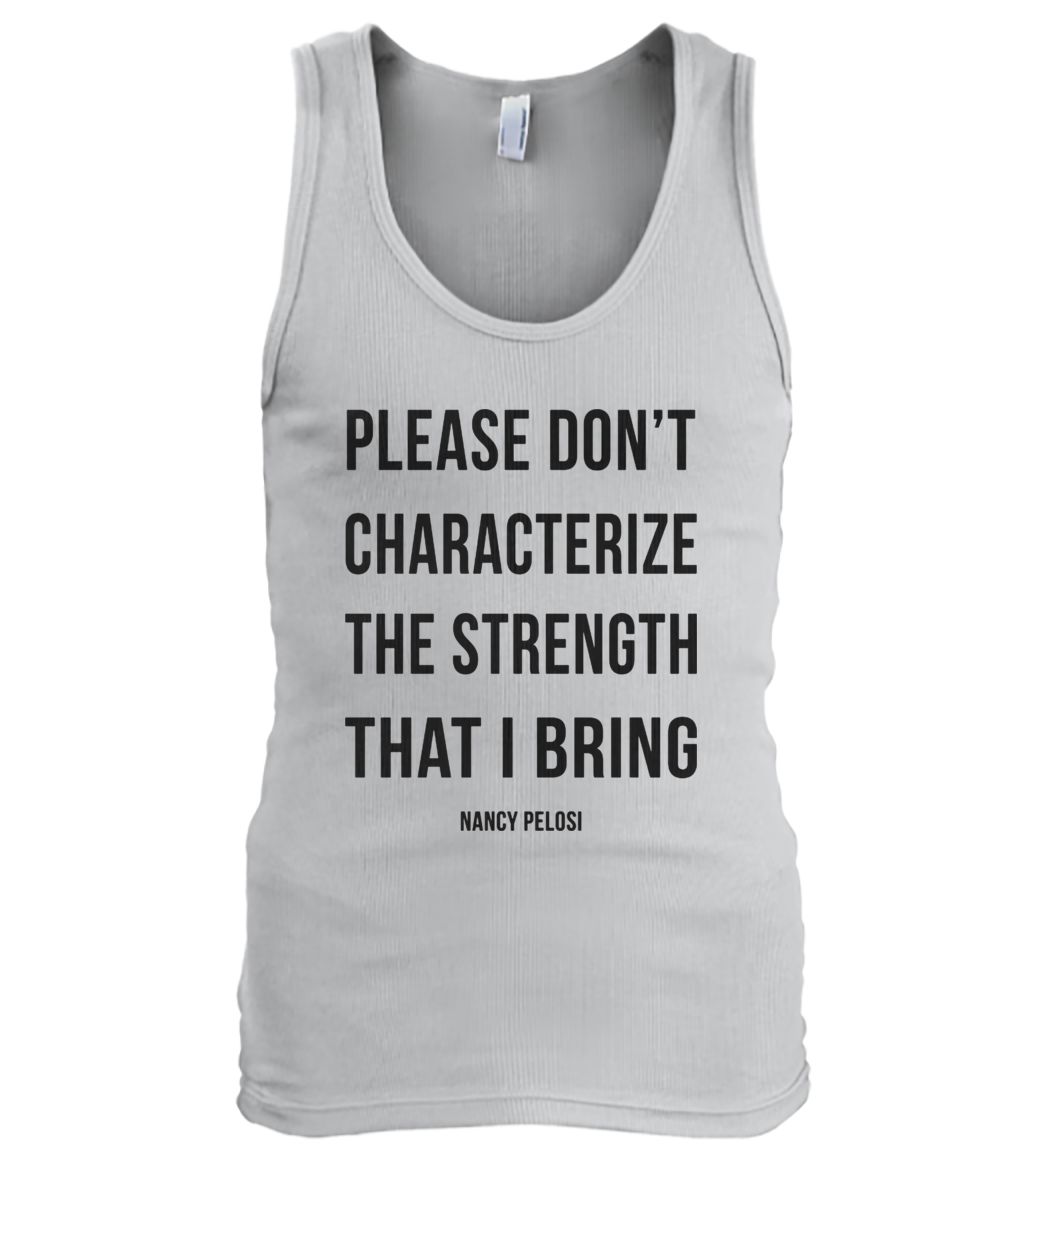 Please don't characterize the strength that I bring men's tank top